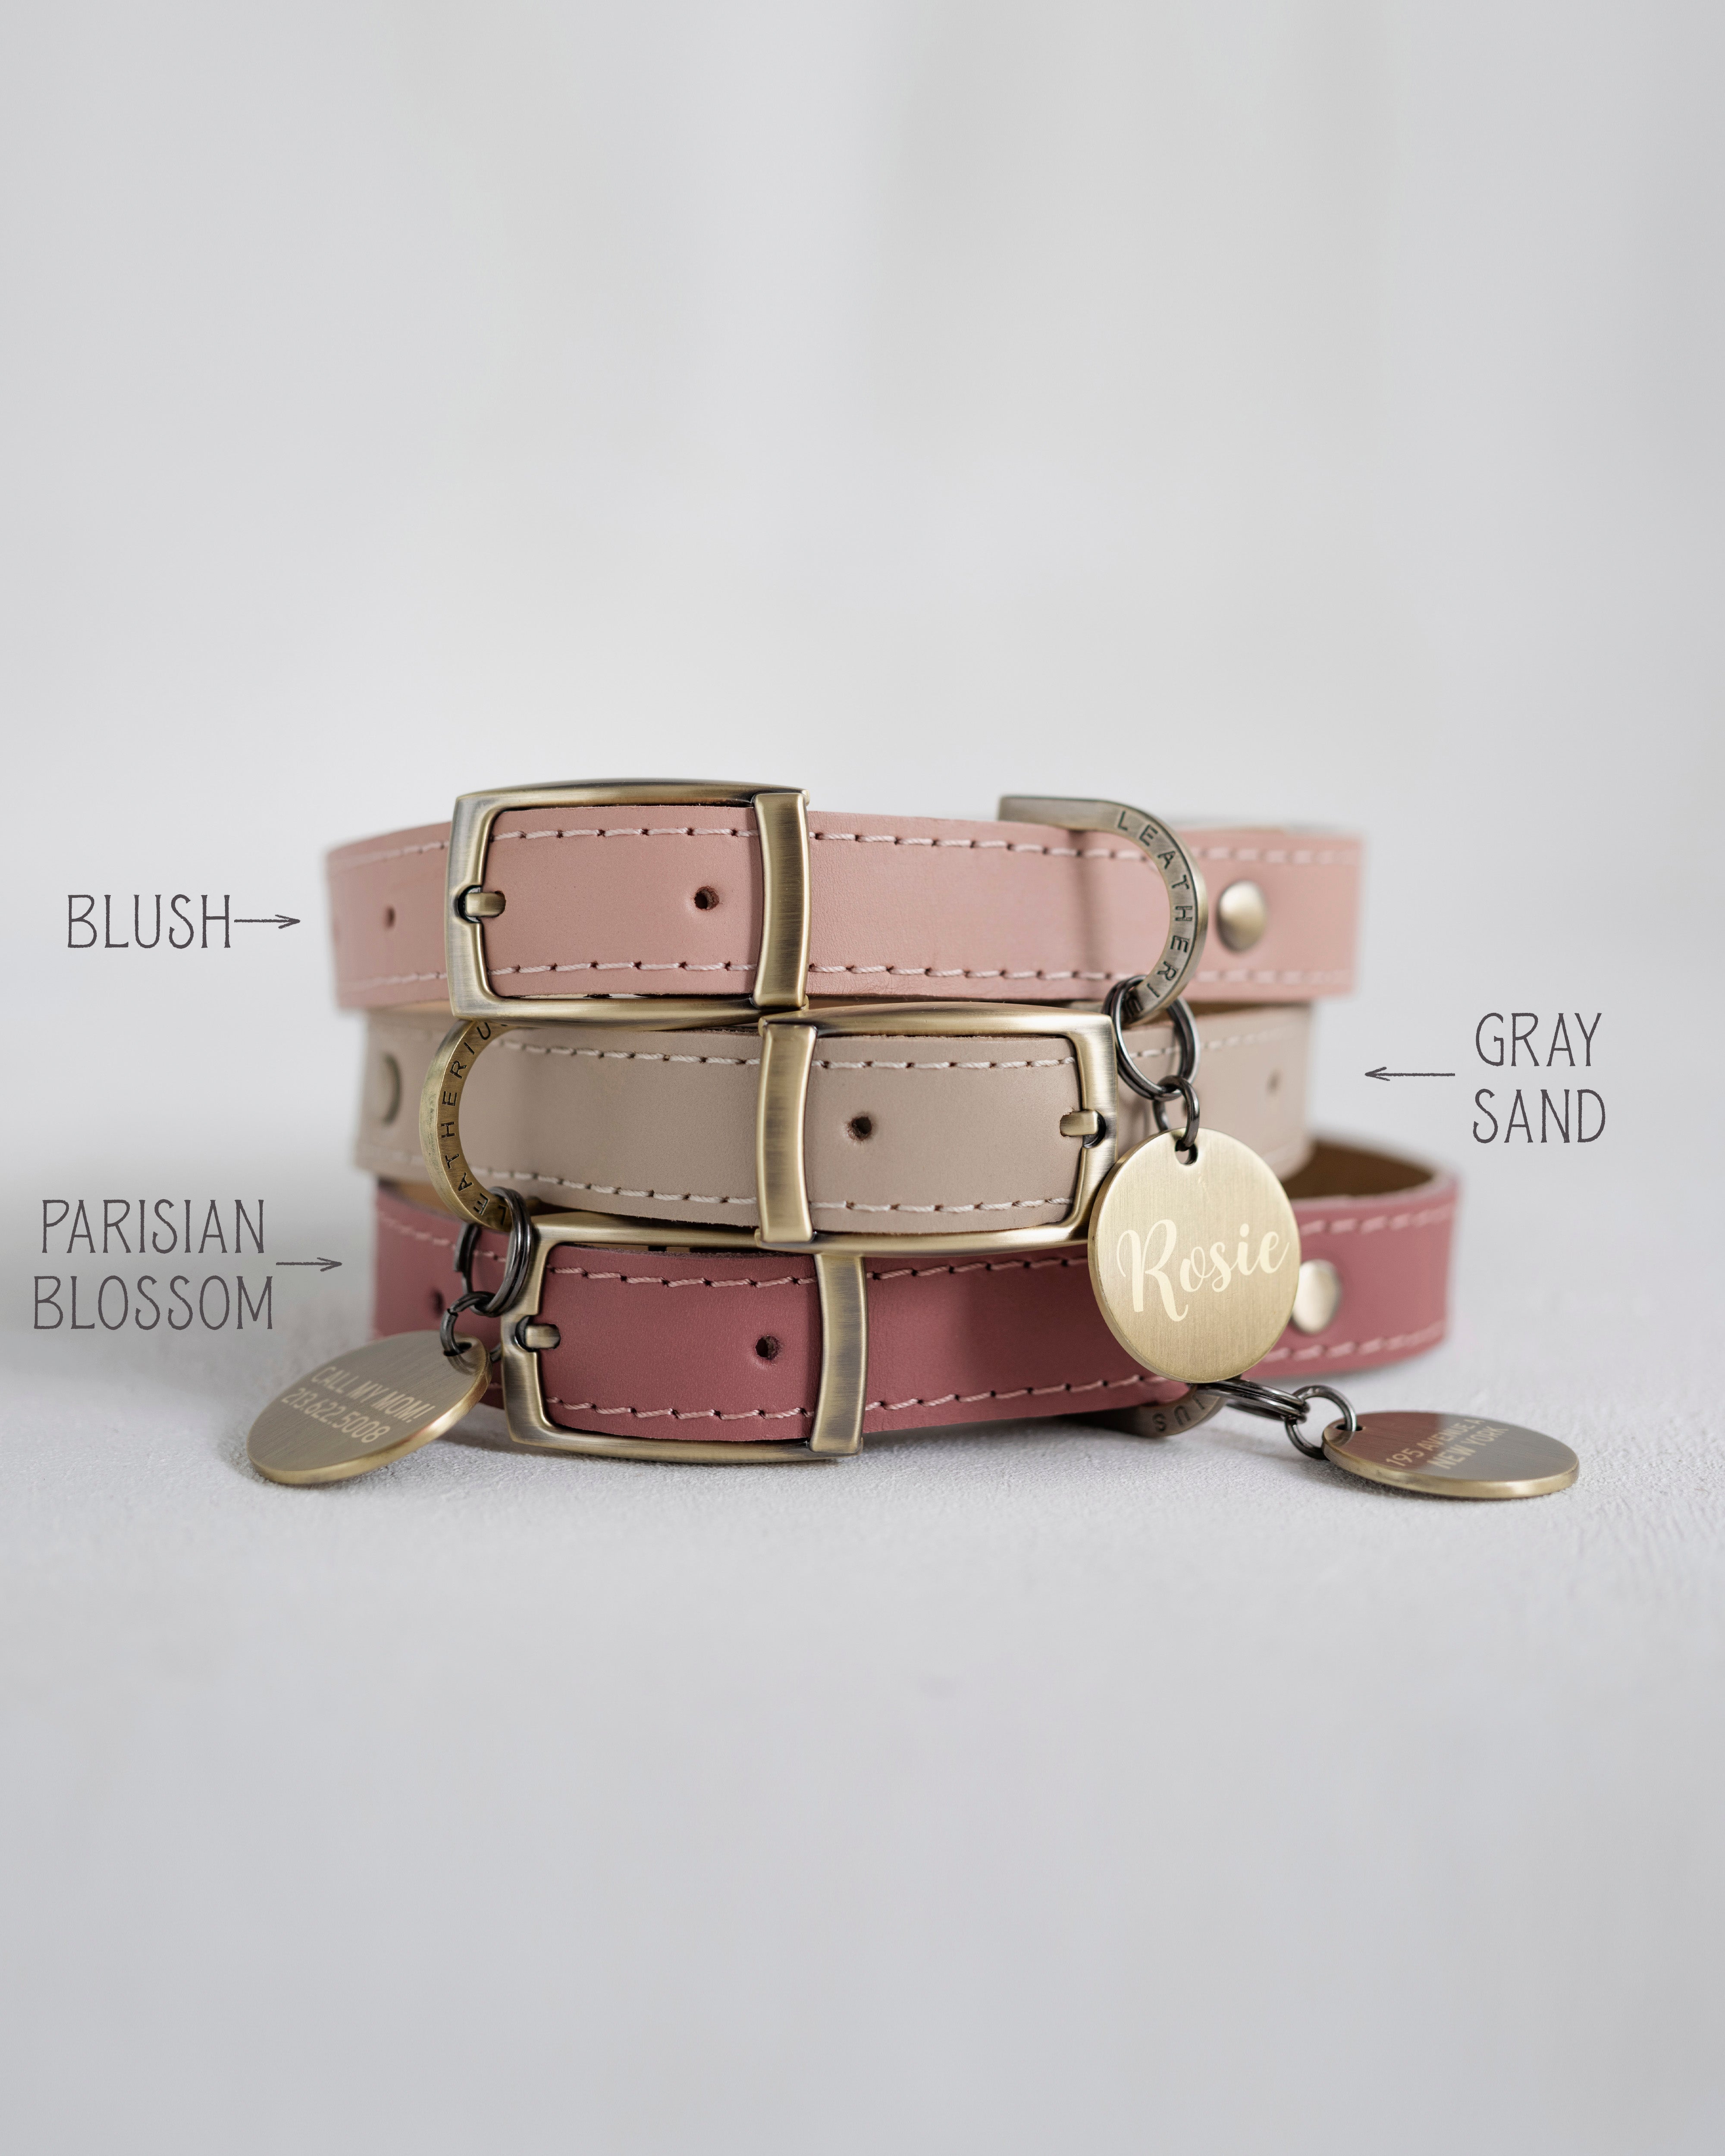 Personalized Leather Dog Collar with classic belt buckle